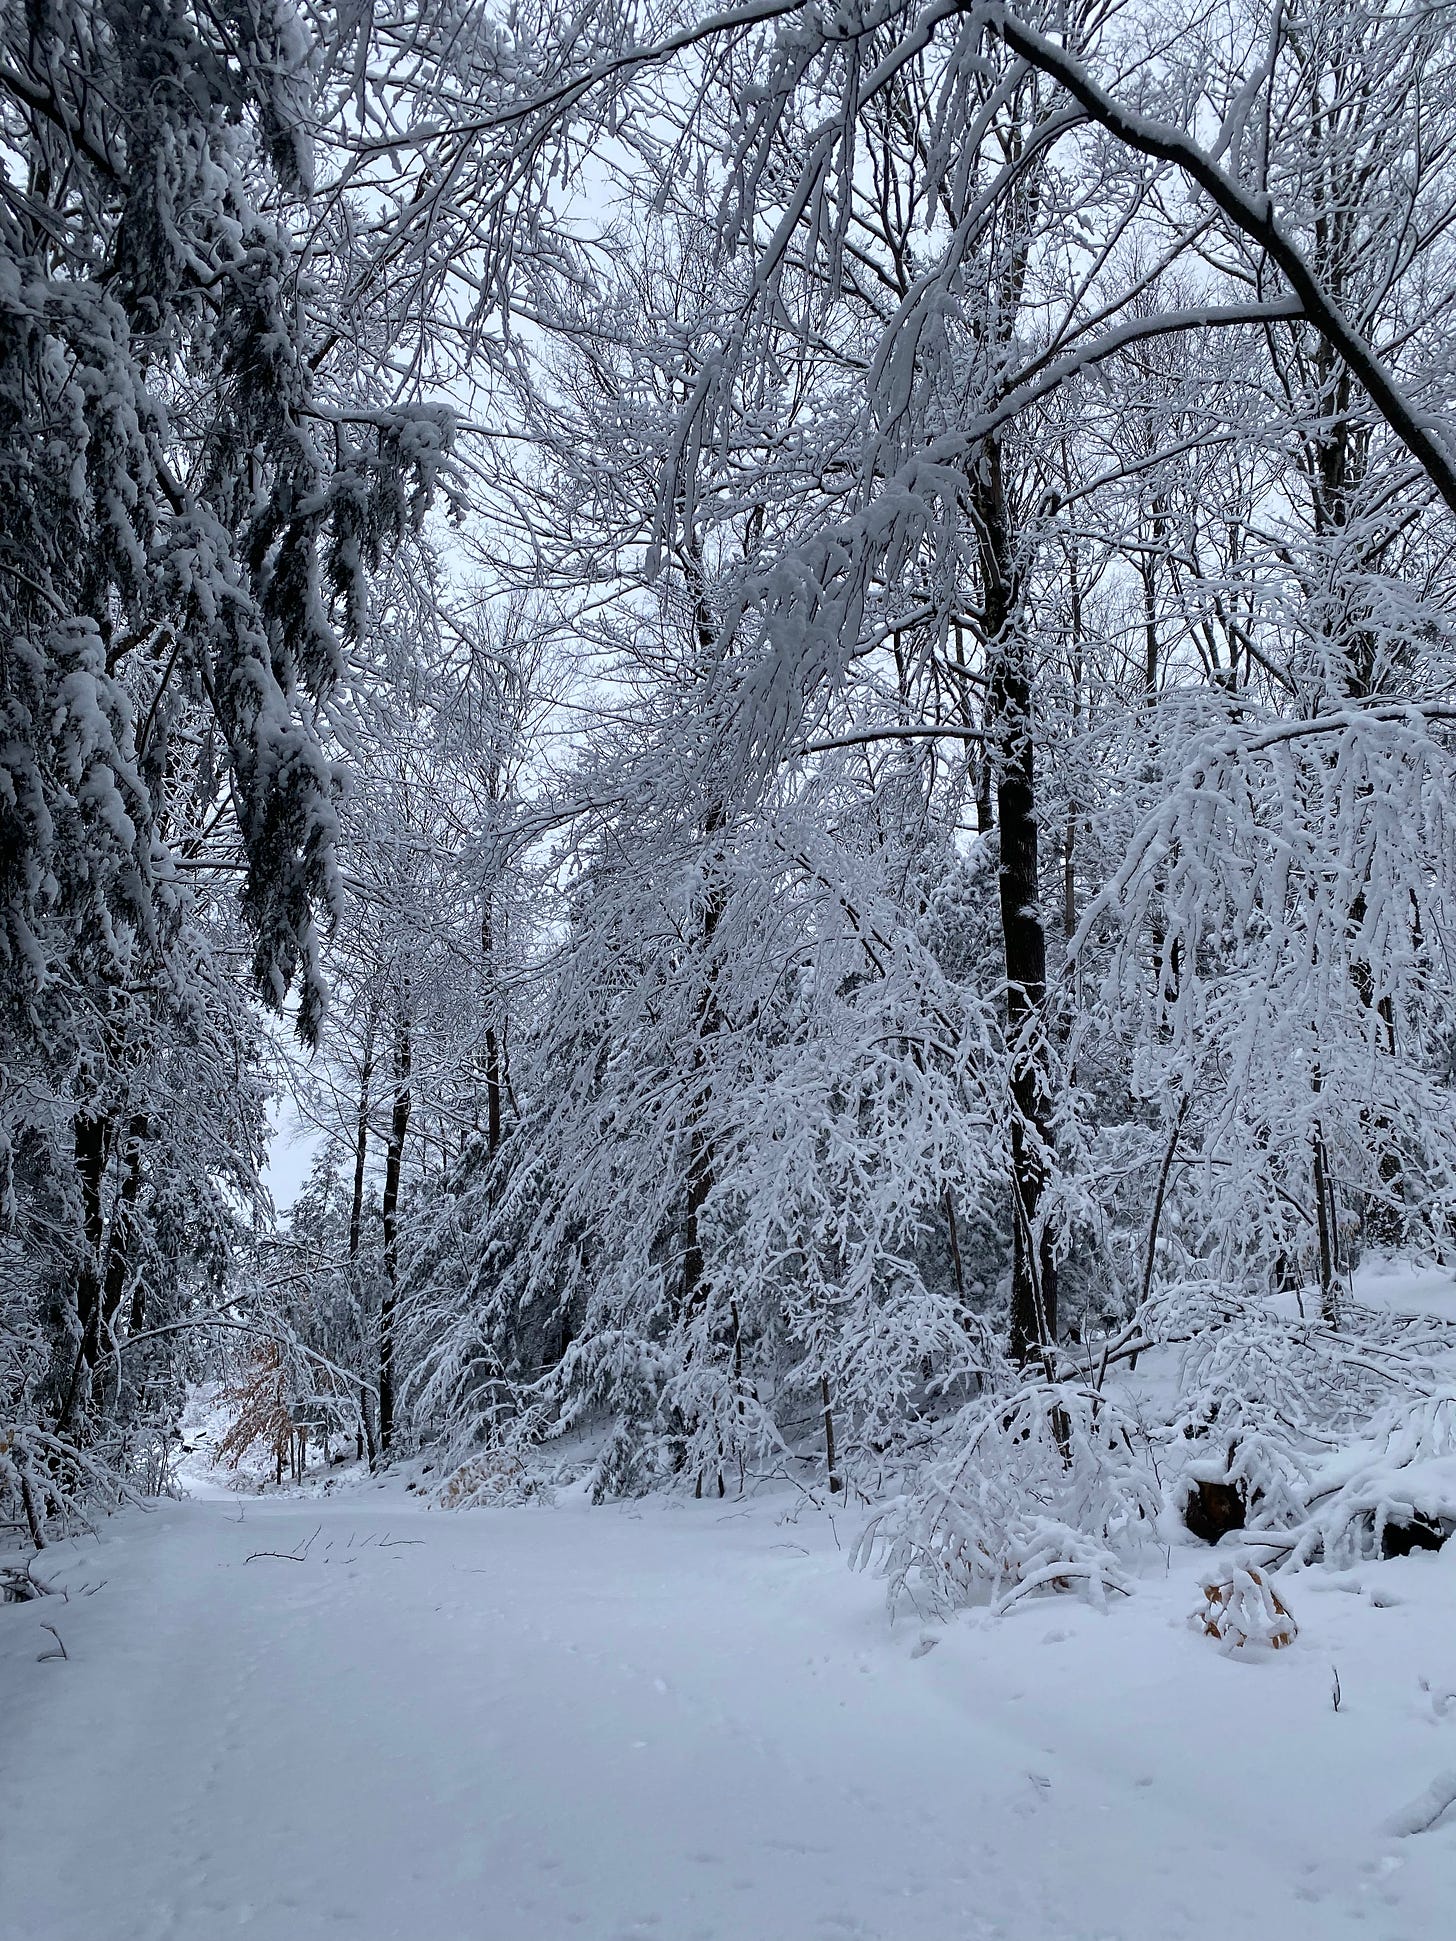 A snowy path through the woods surrounded by deeply bent, snow-covered branches.